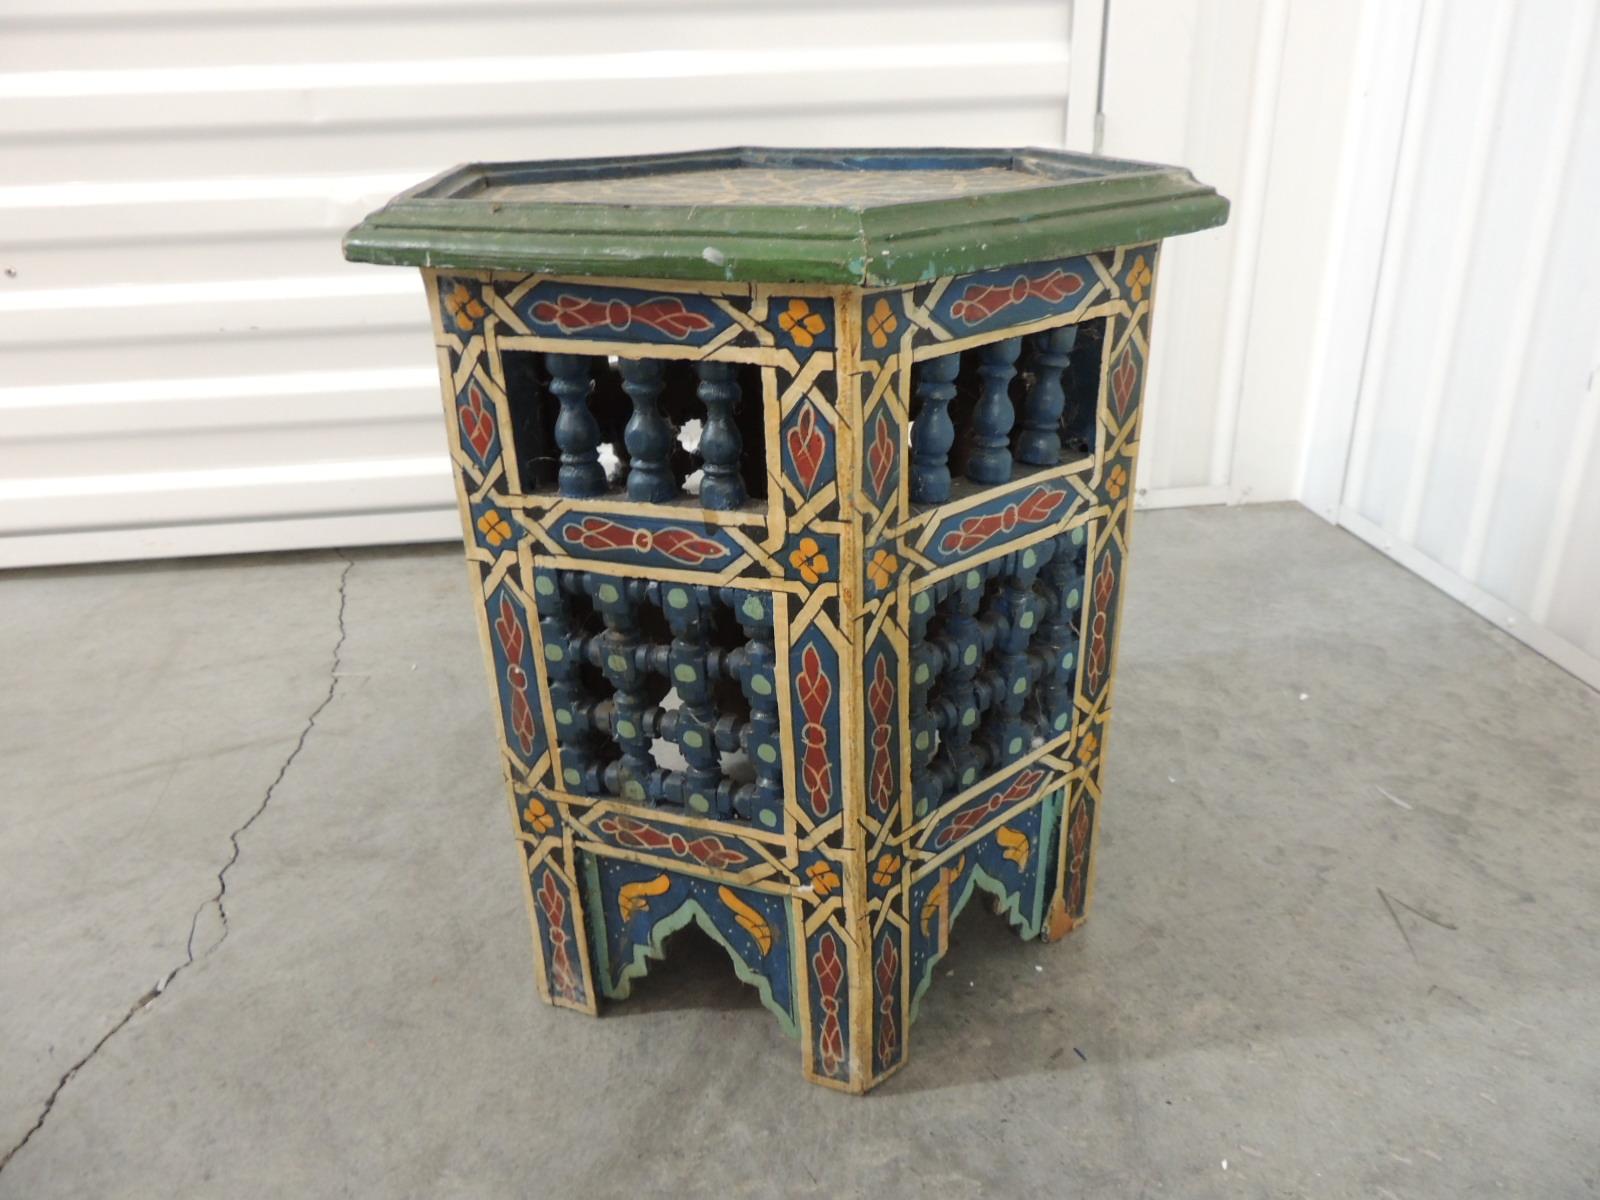 Hand painted Moroccan handcrafted side table or low drinks table.
Hexagonal shape with traditional Moroccan painted patterns with cutout trellis patterns and torn wood finials.
In shades of yellow, blue, red, green and aqua.
Ideal as a low table